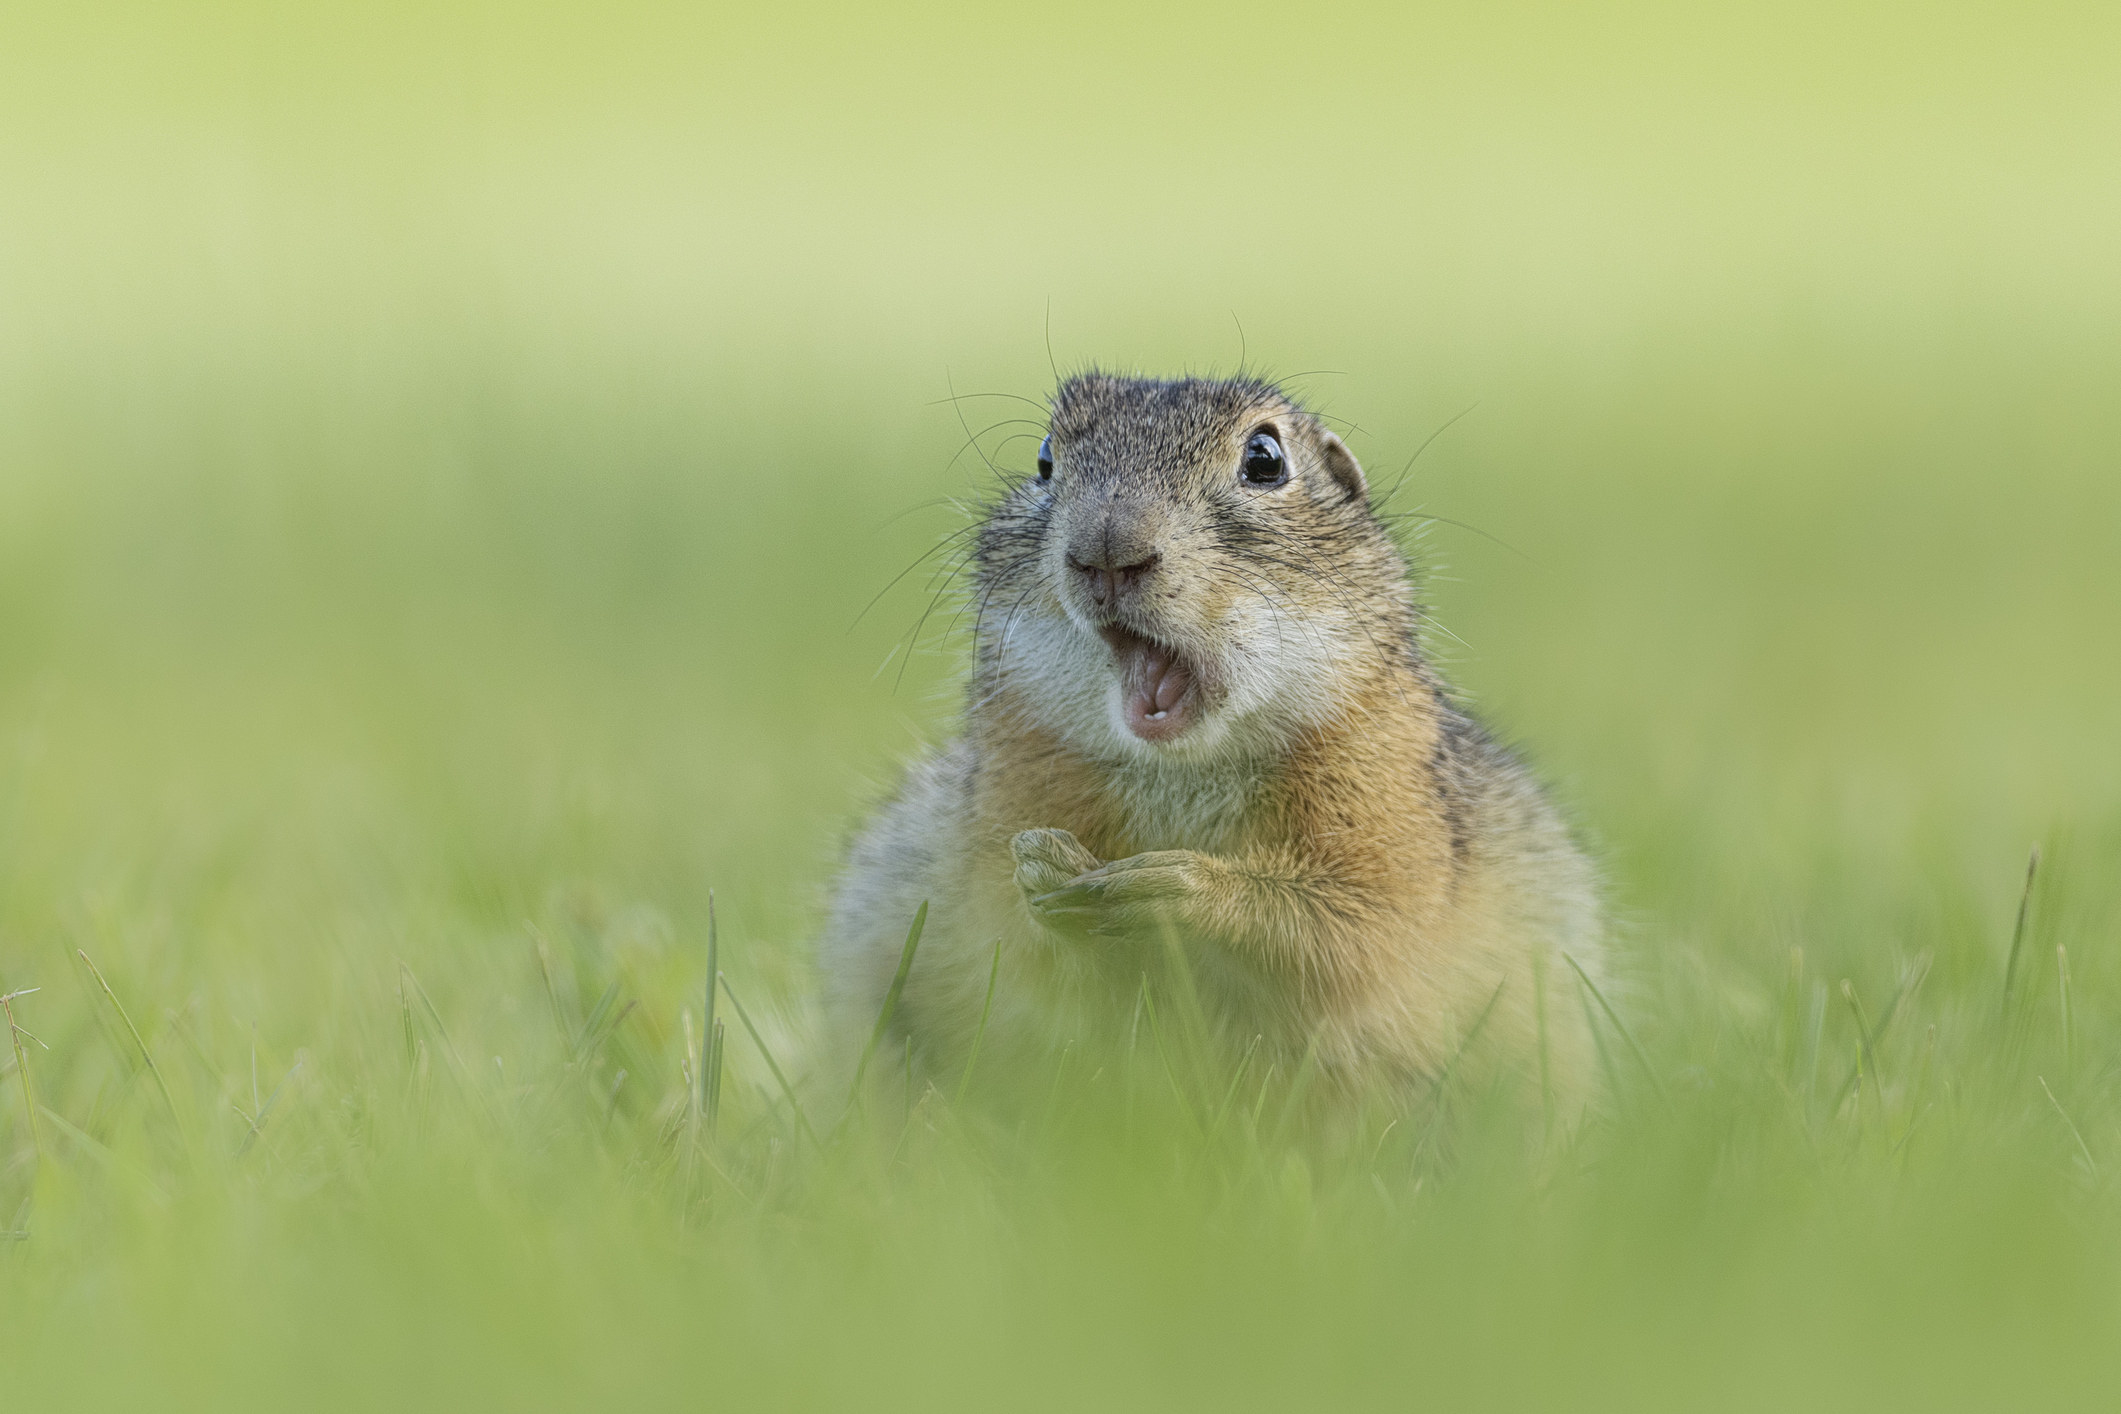 a ground squirrel with a shocked expression